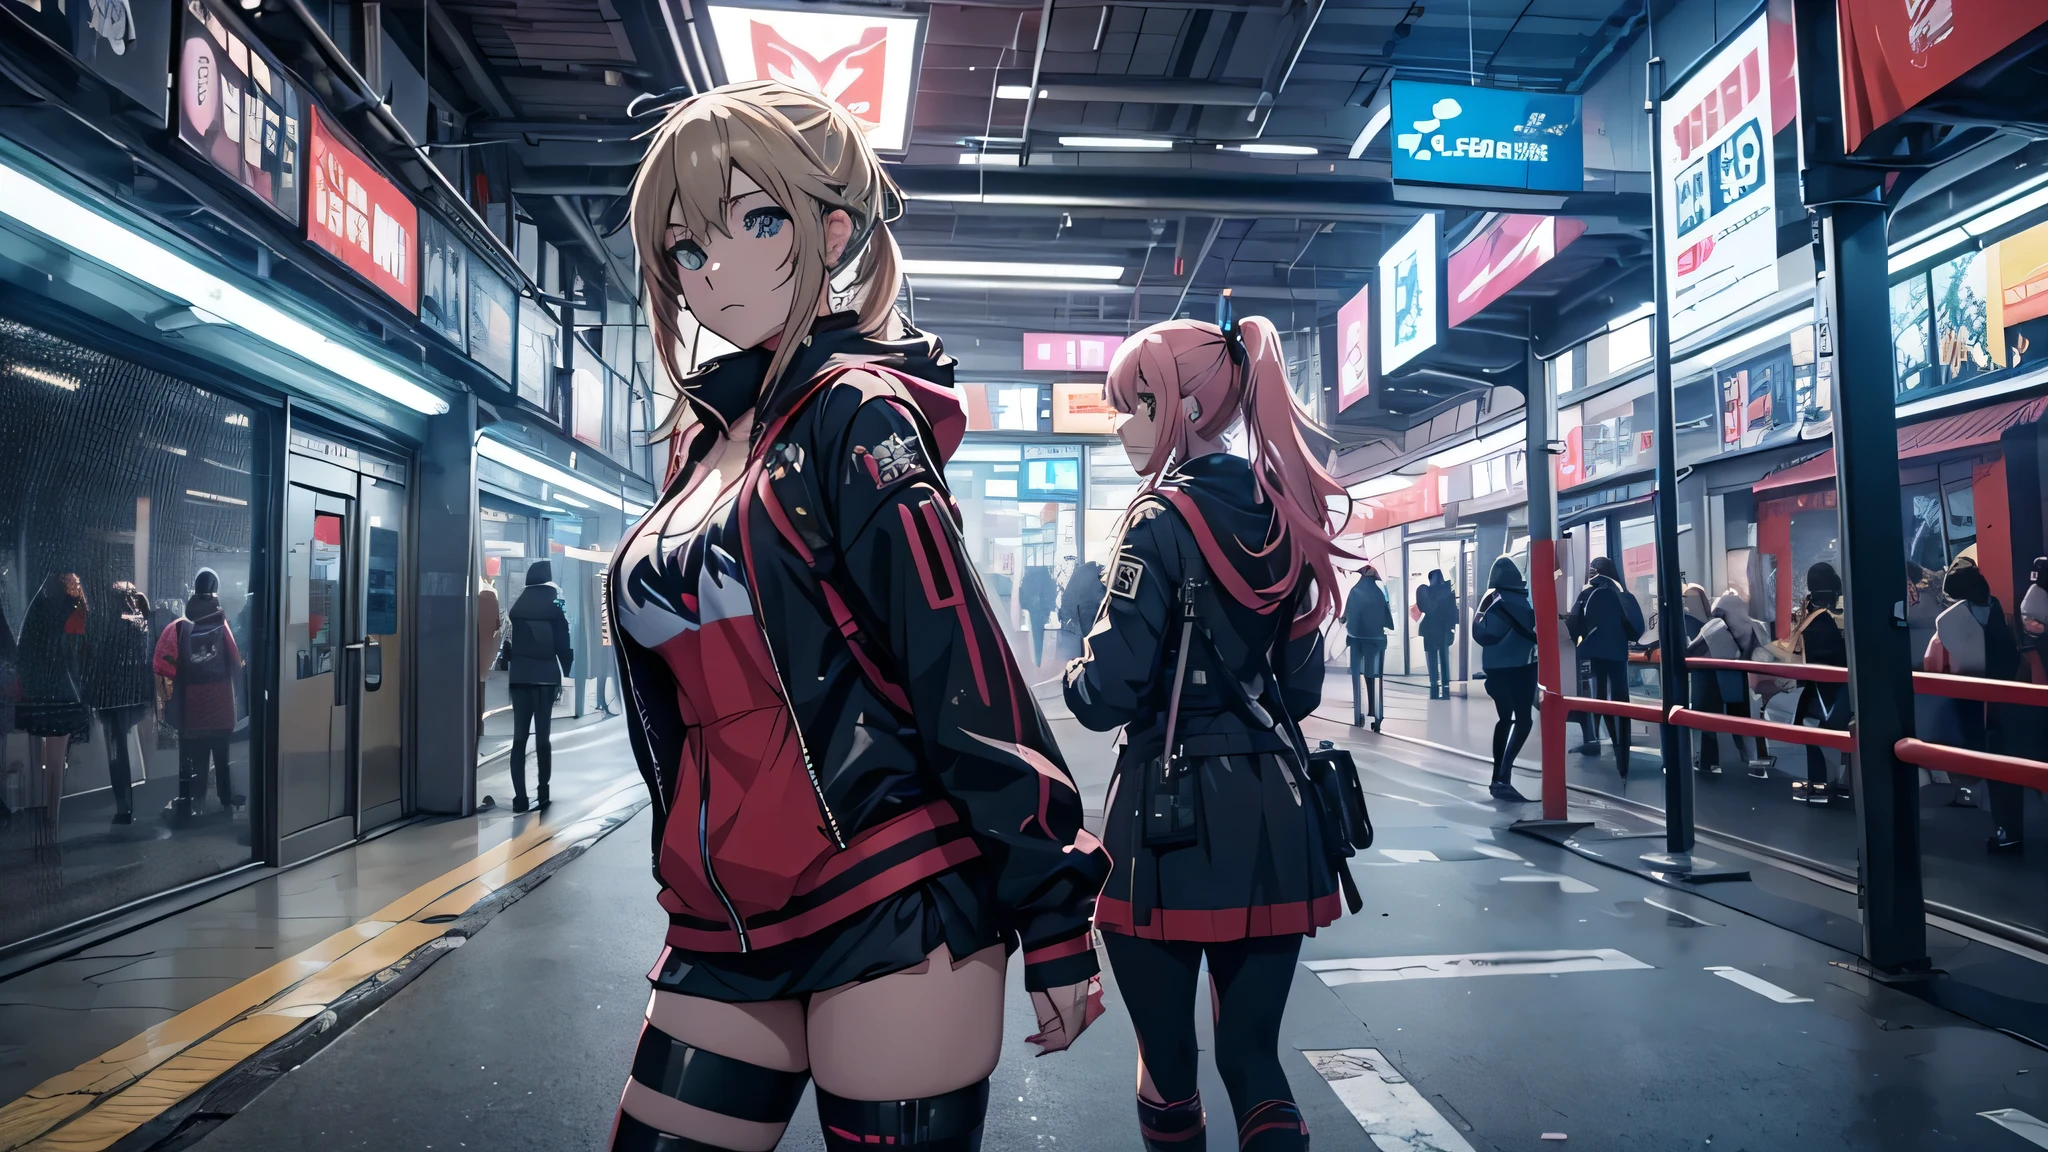 4 anime girls posing in a city at night., cyberpunk oppai, anime ciberpunk art, anime ciberpunk, cyberpunk anime art, digital cyberpunk anime art, digital cyberpunk - anime art, modern cyberpunk anime, anime ciberpunk digital!!, Best Anime 4K Konachan Wallpaper, female cyberpunk anime girl, in the cyberpunk city, trend on cgstation, cyberpunk women in the subway using fortnite type weapons